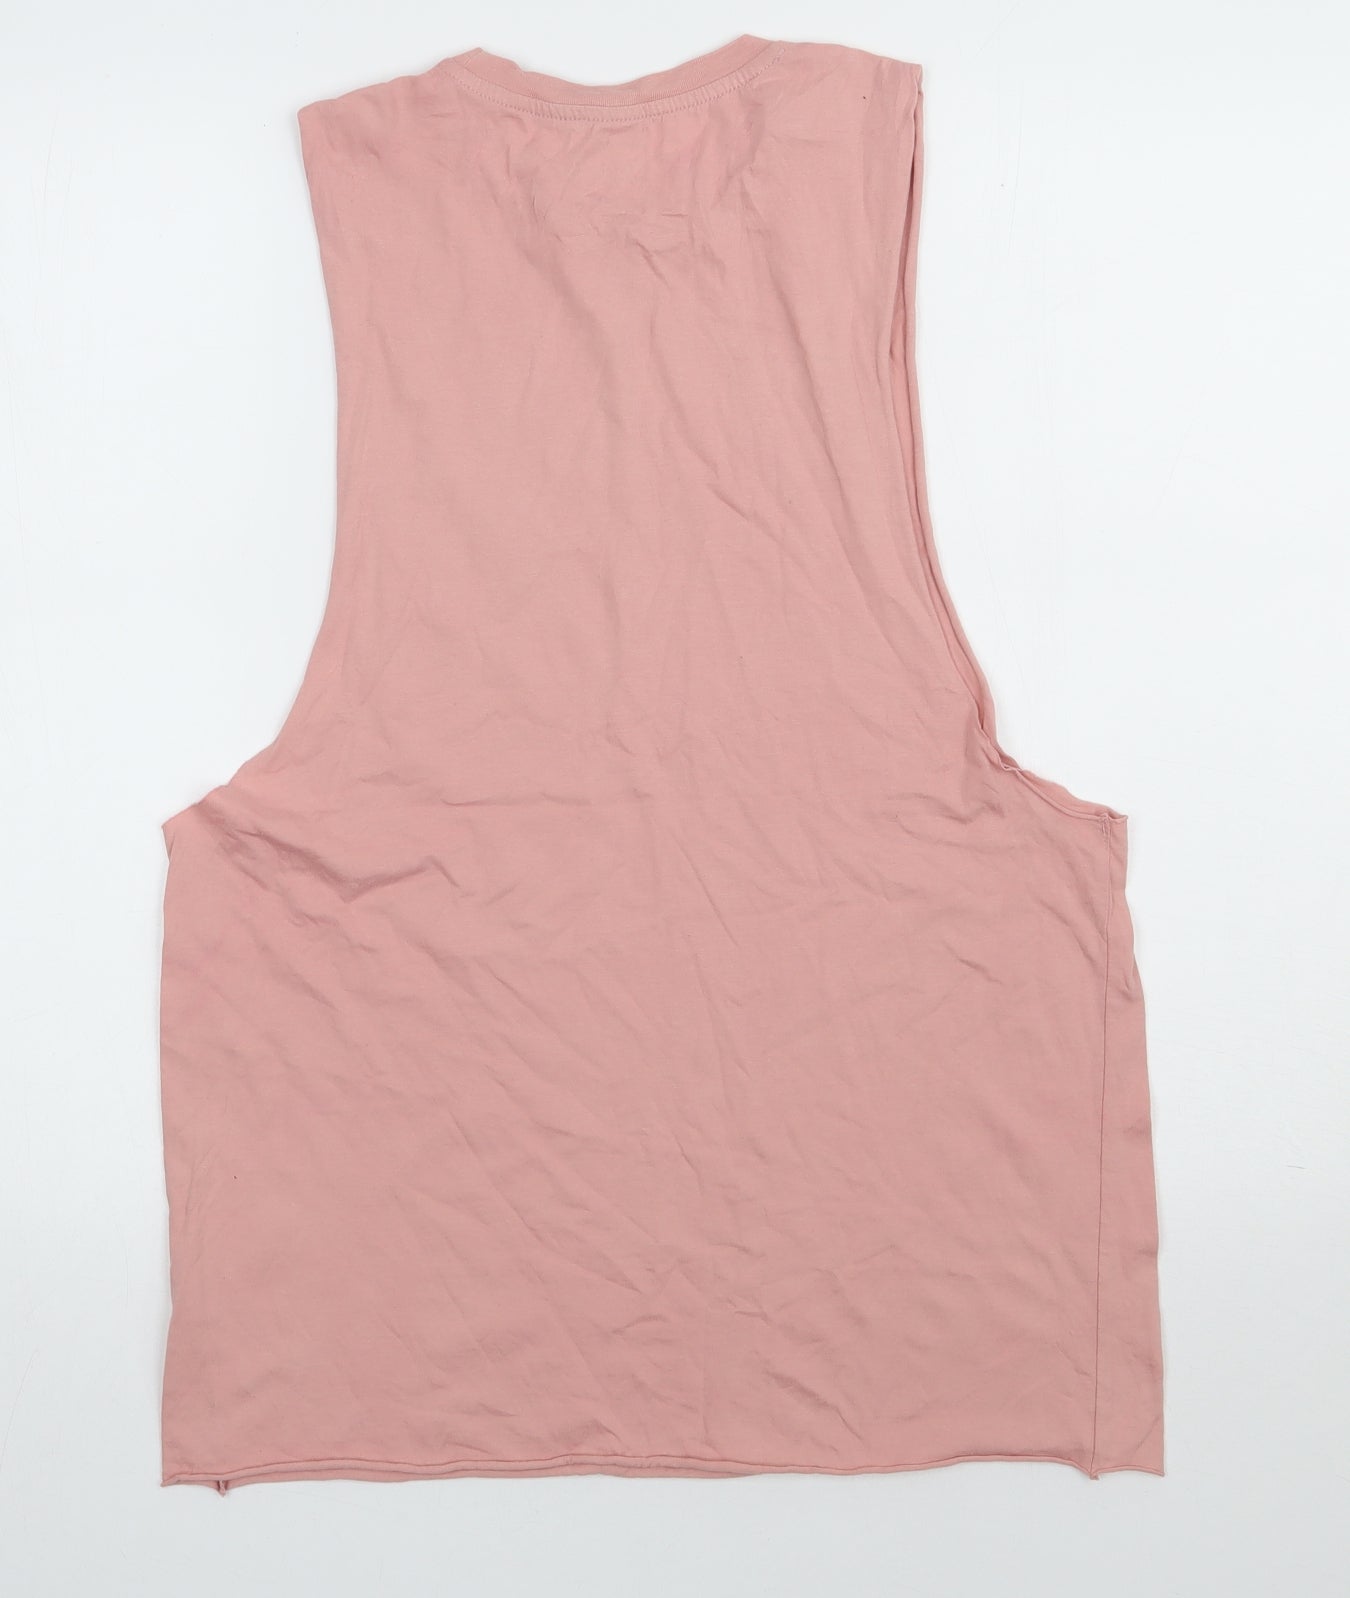 River Island Mens Pink  Cotton Basic Tank Size M Scoop Neck Pullover